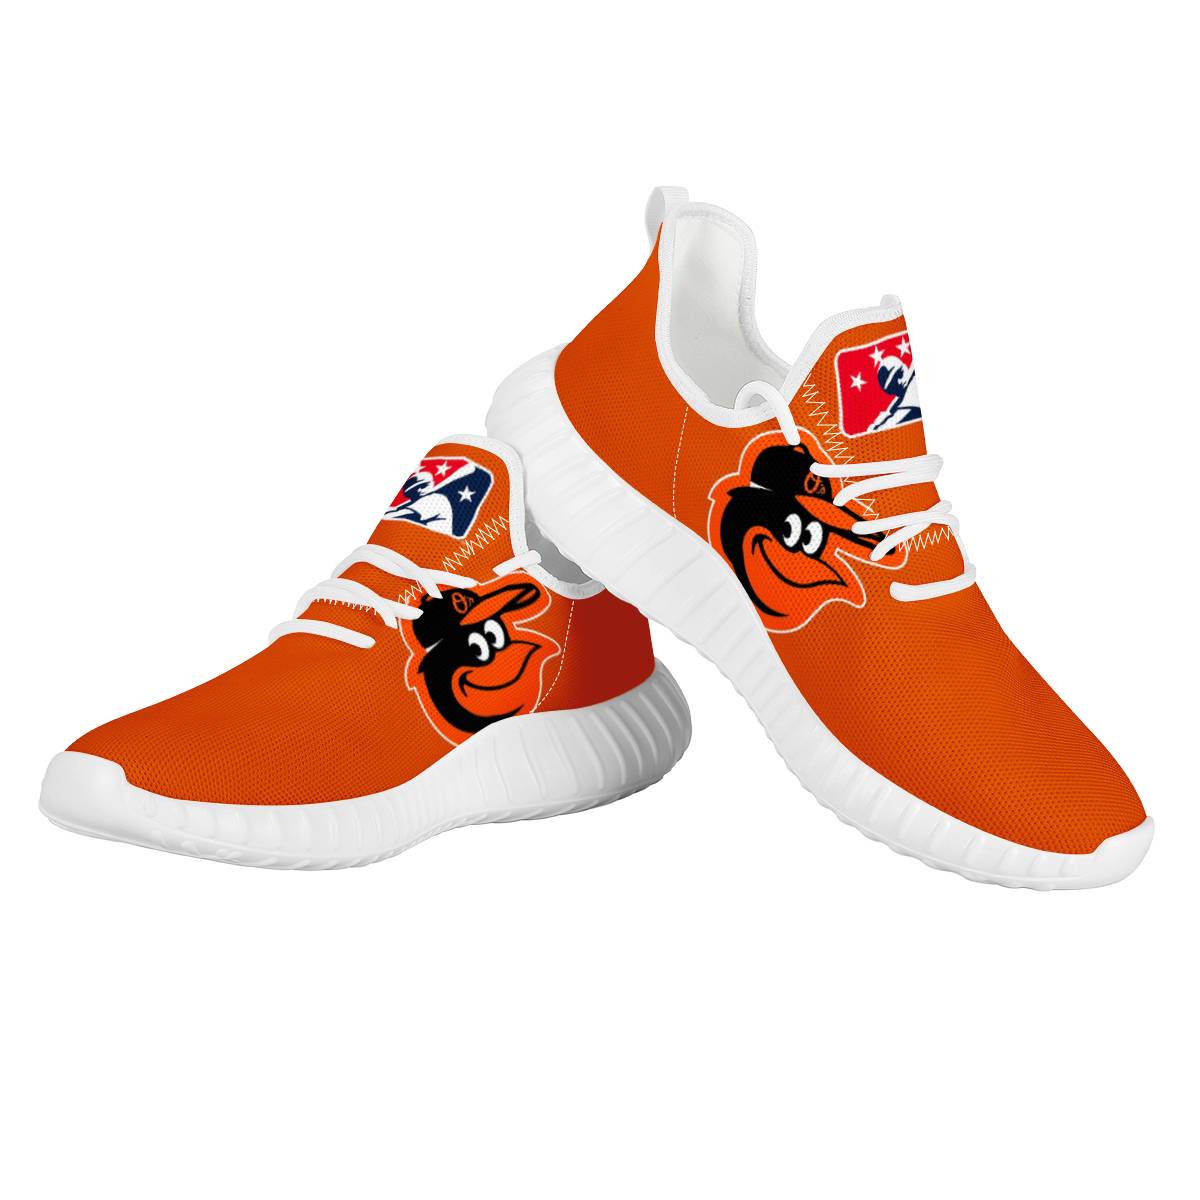 Women's Baltimore Orioles Mesh Knit Sneakers/Shoes 001